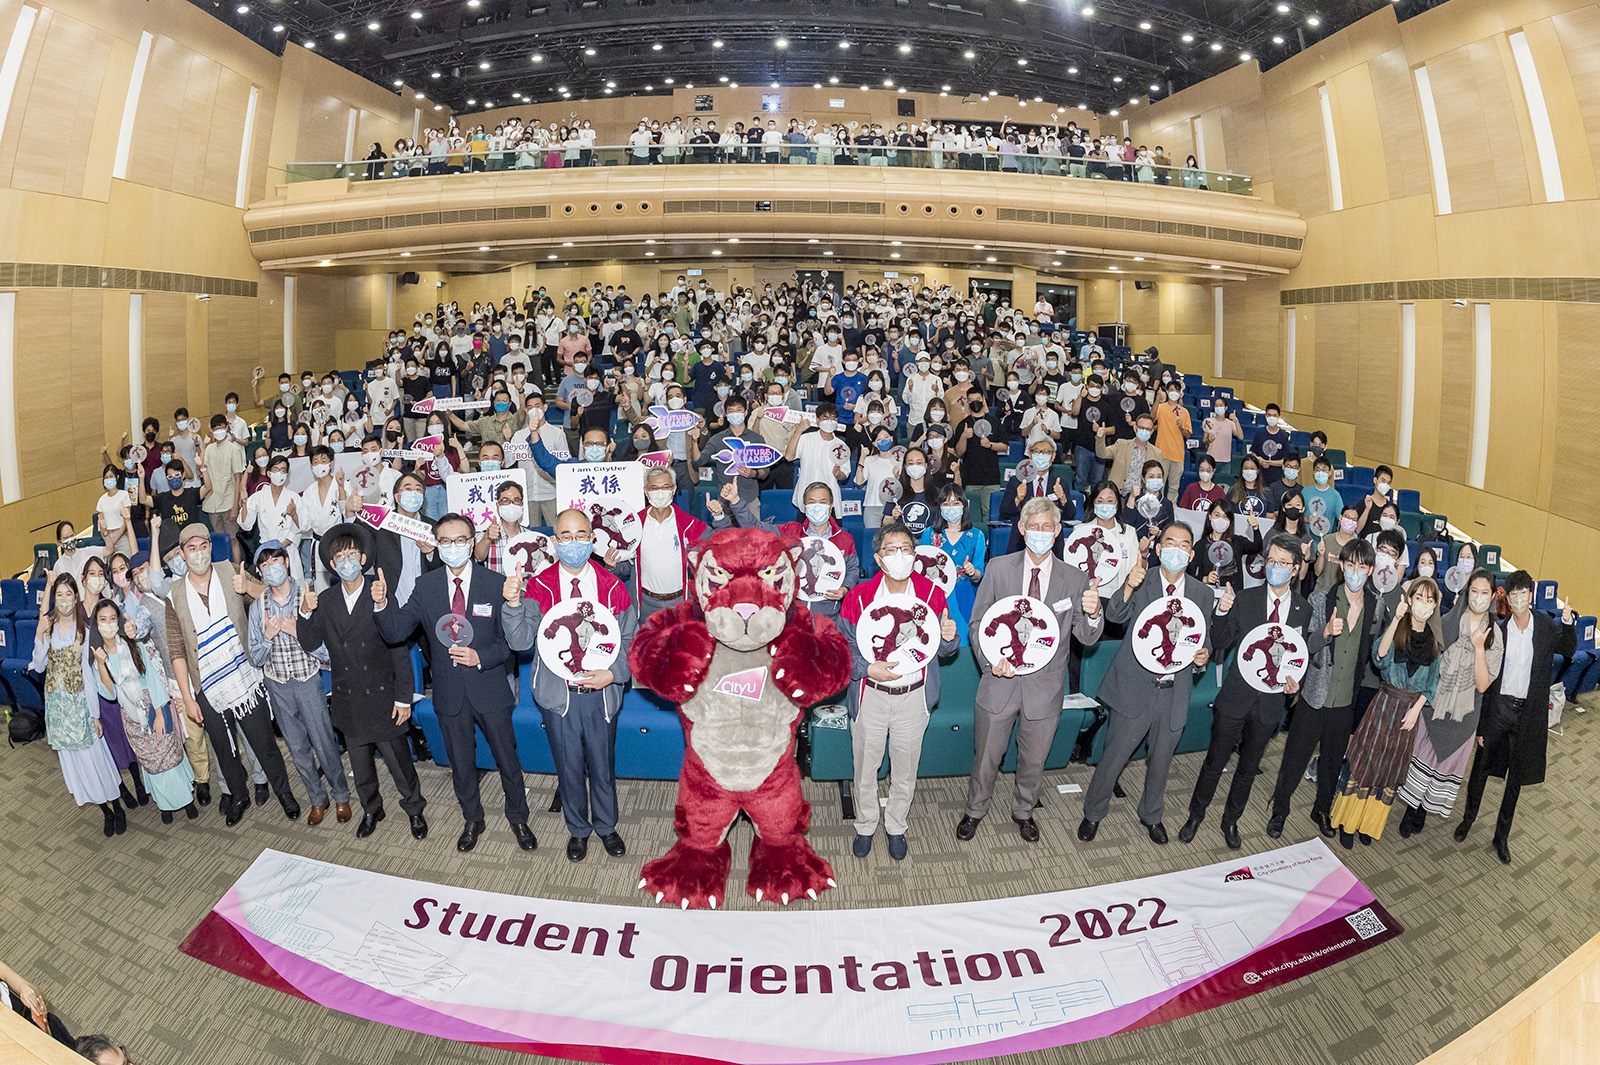 New students and the University Mascot were warmly welcomed at the University Welcoming Ceremony.